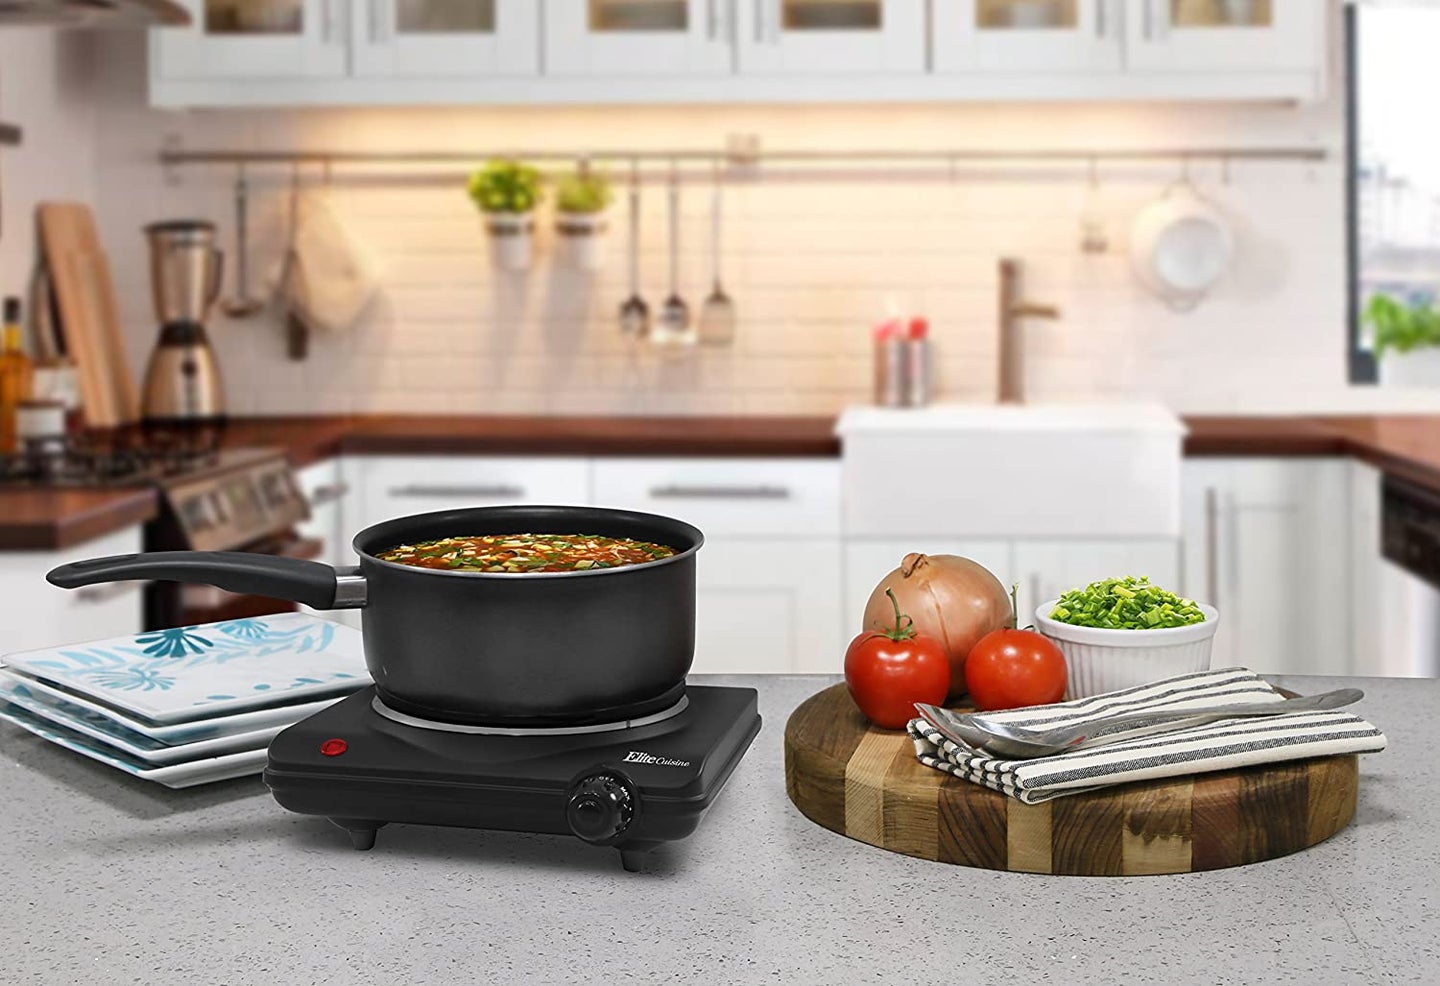 induction cooktop on a kitchen counter with plates and vegetables